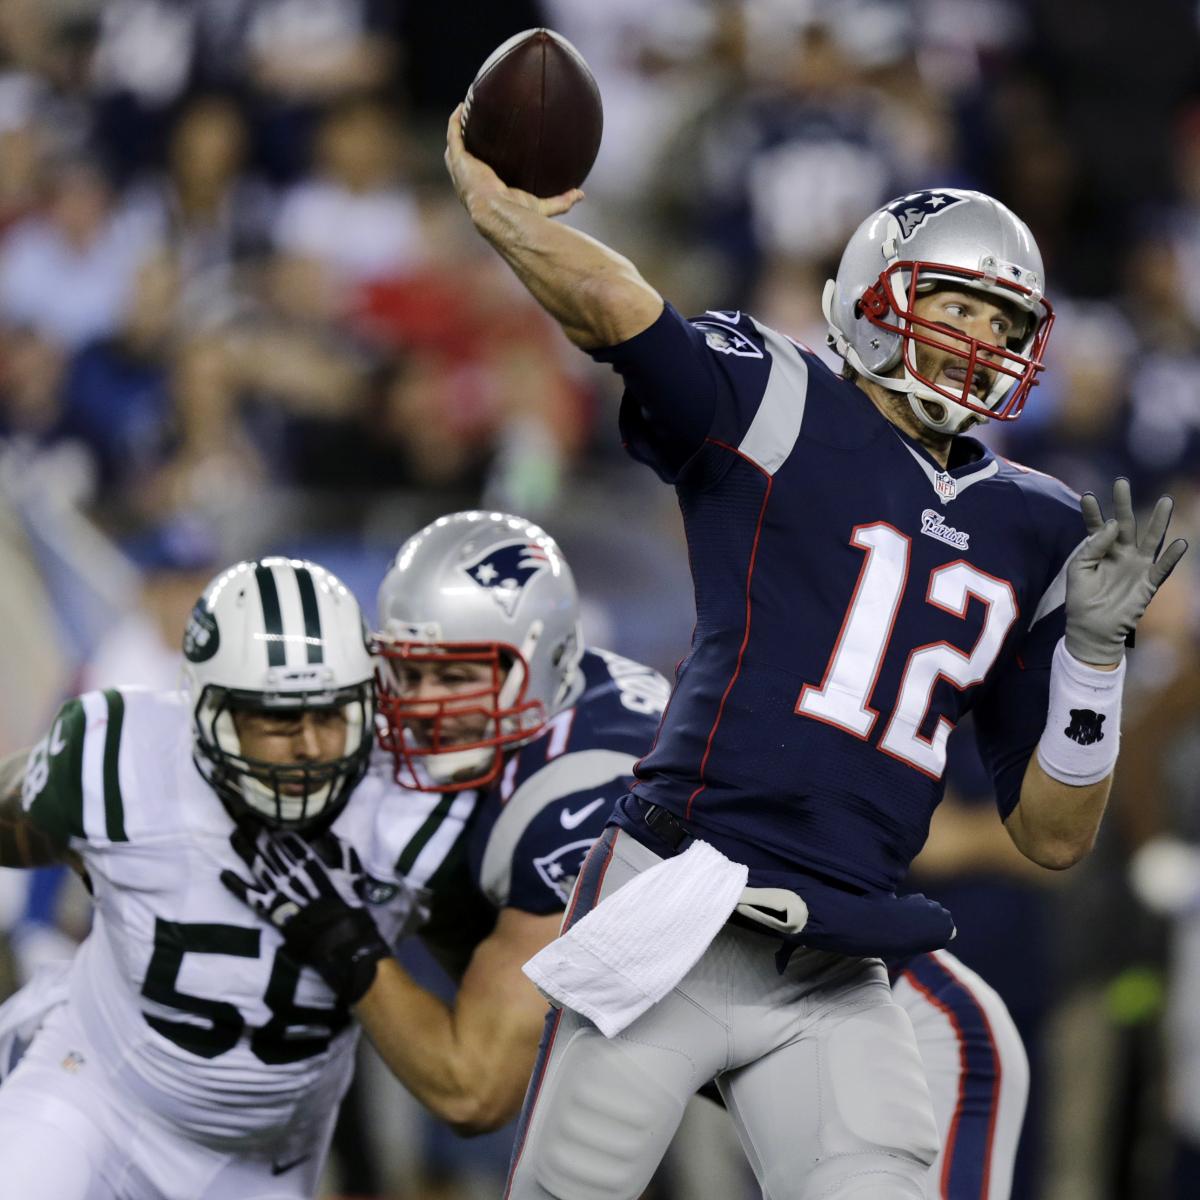 Jets vs. Patriots What's the Game Plan for New England? News, Scores